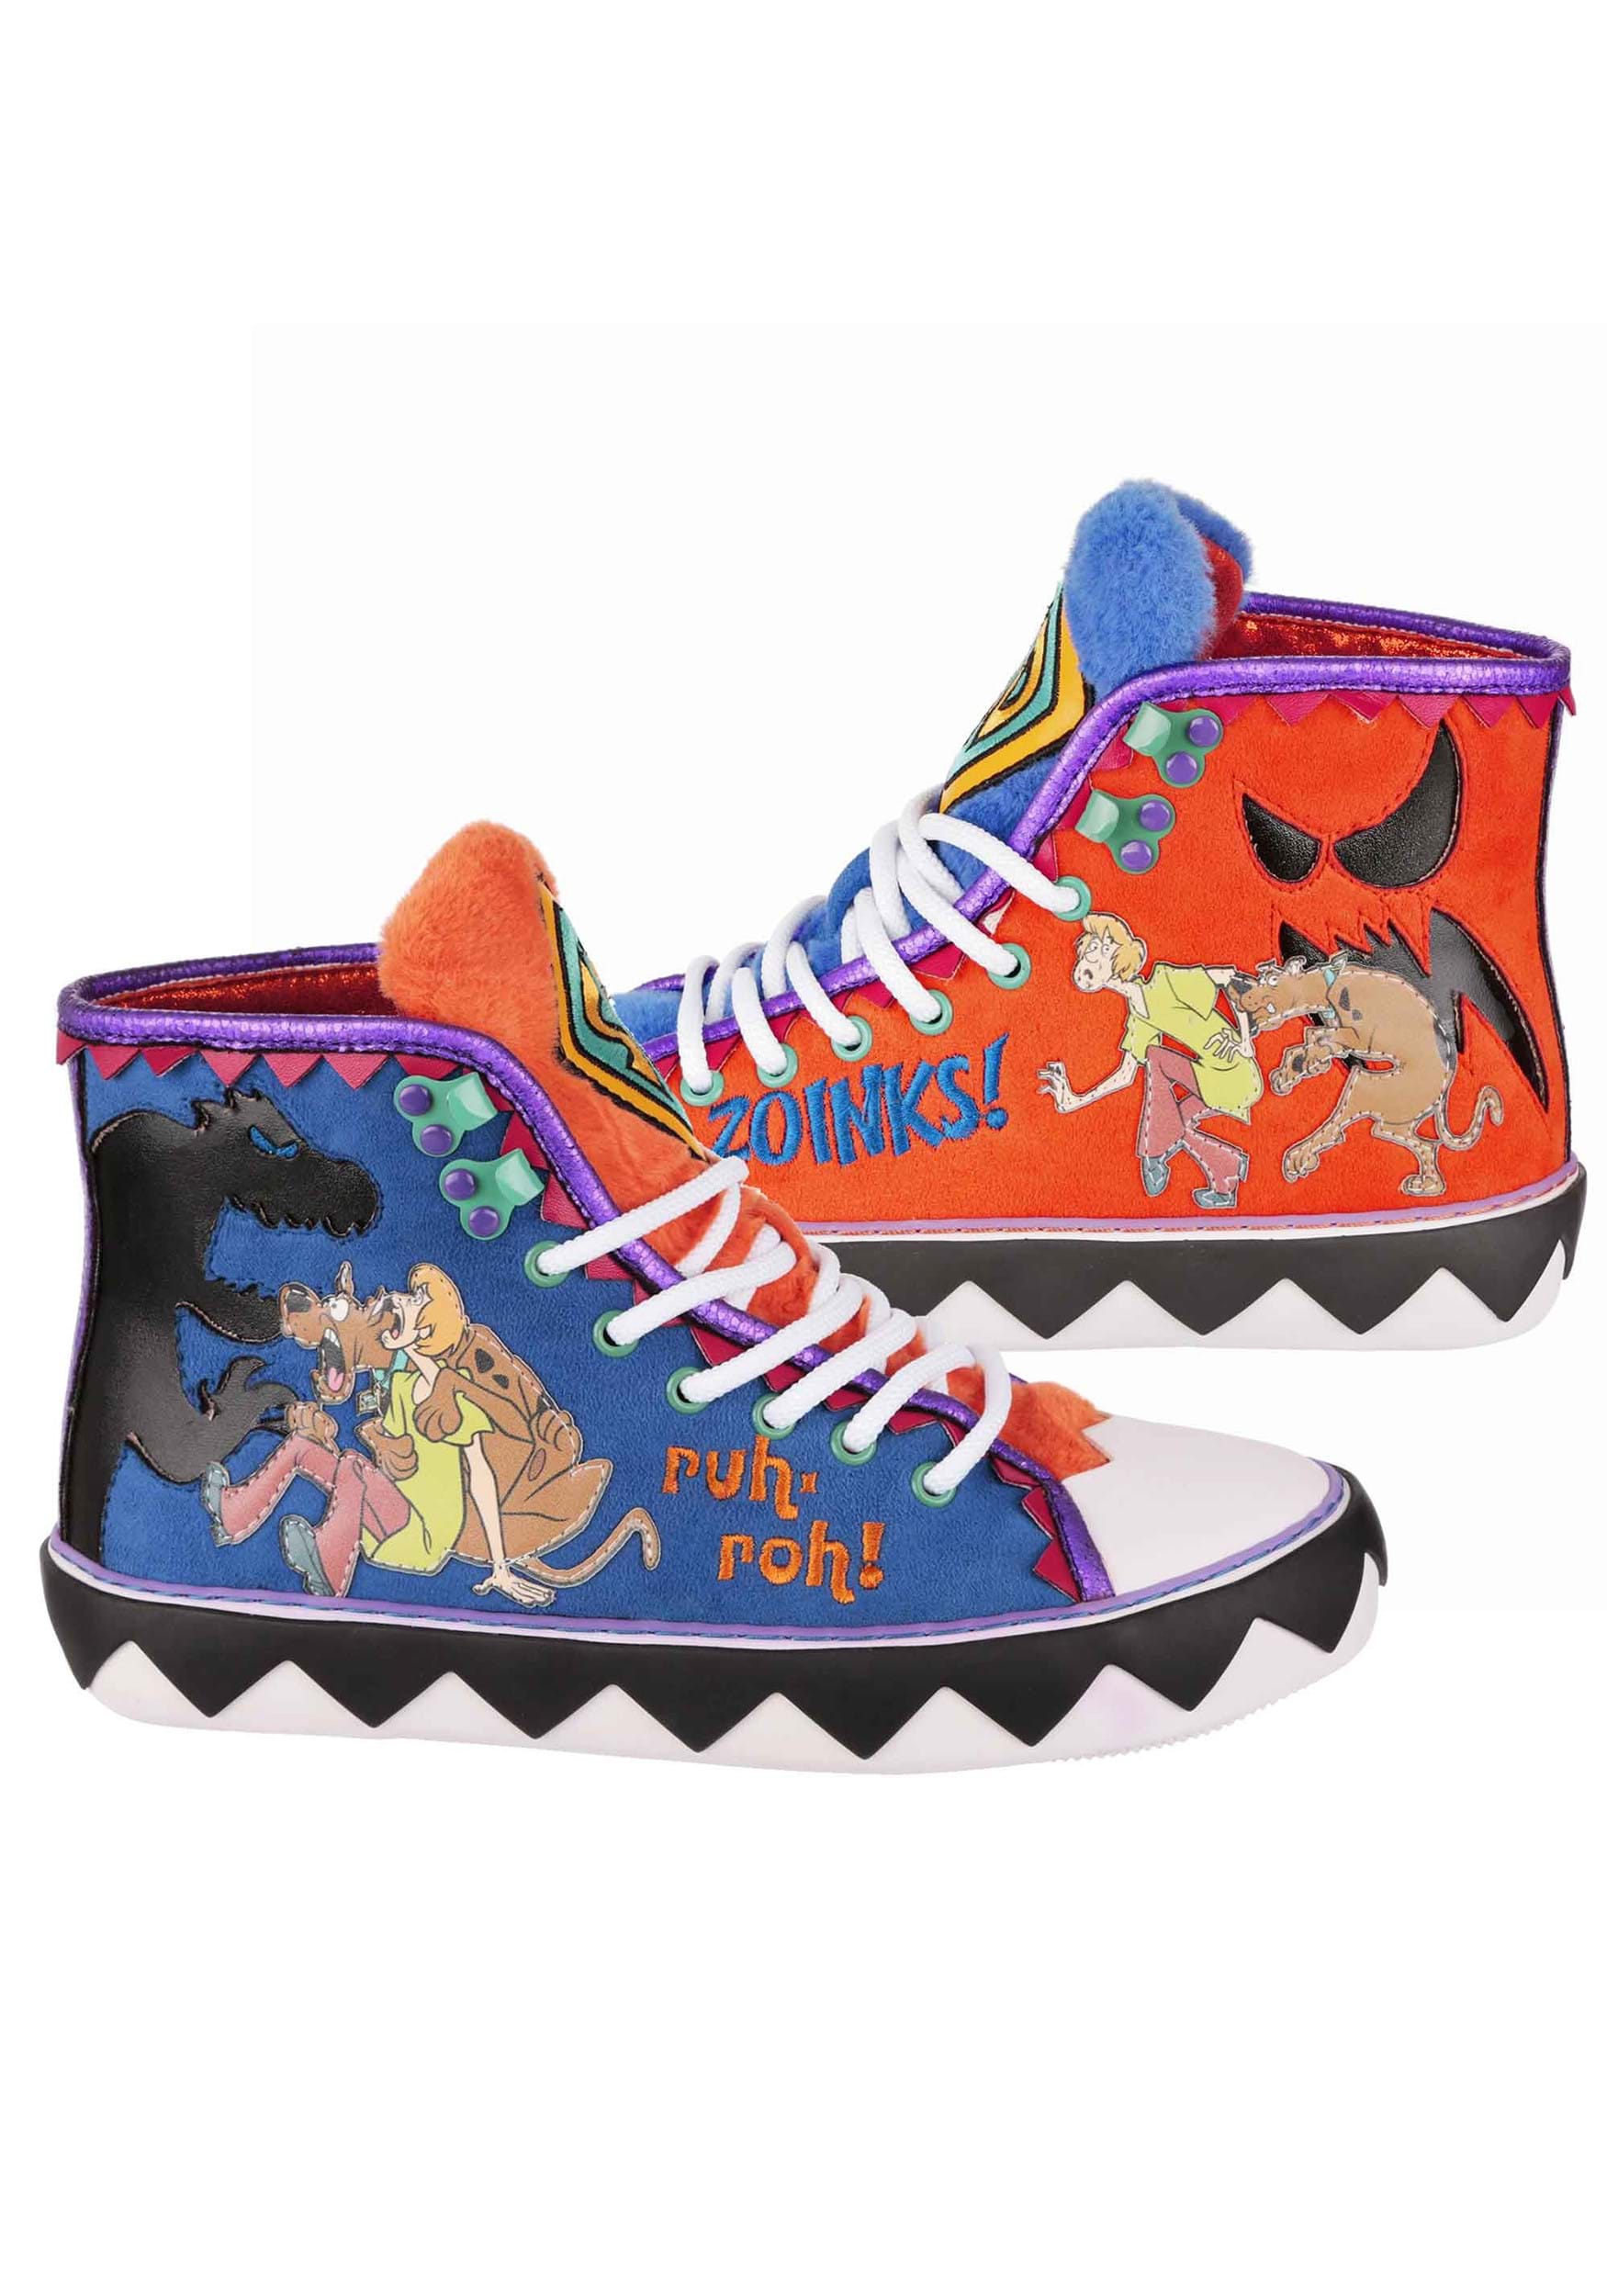 Image of Irregular Choice Scooby Doo Zoinks Sneakers ID IRR4125-41A-13